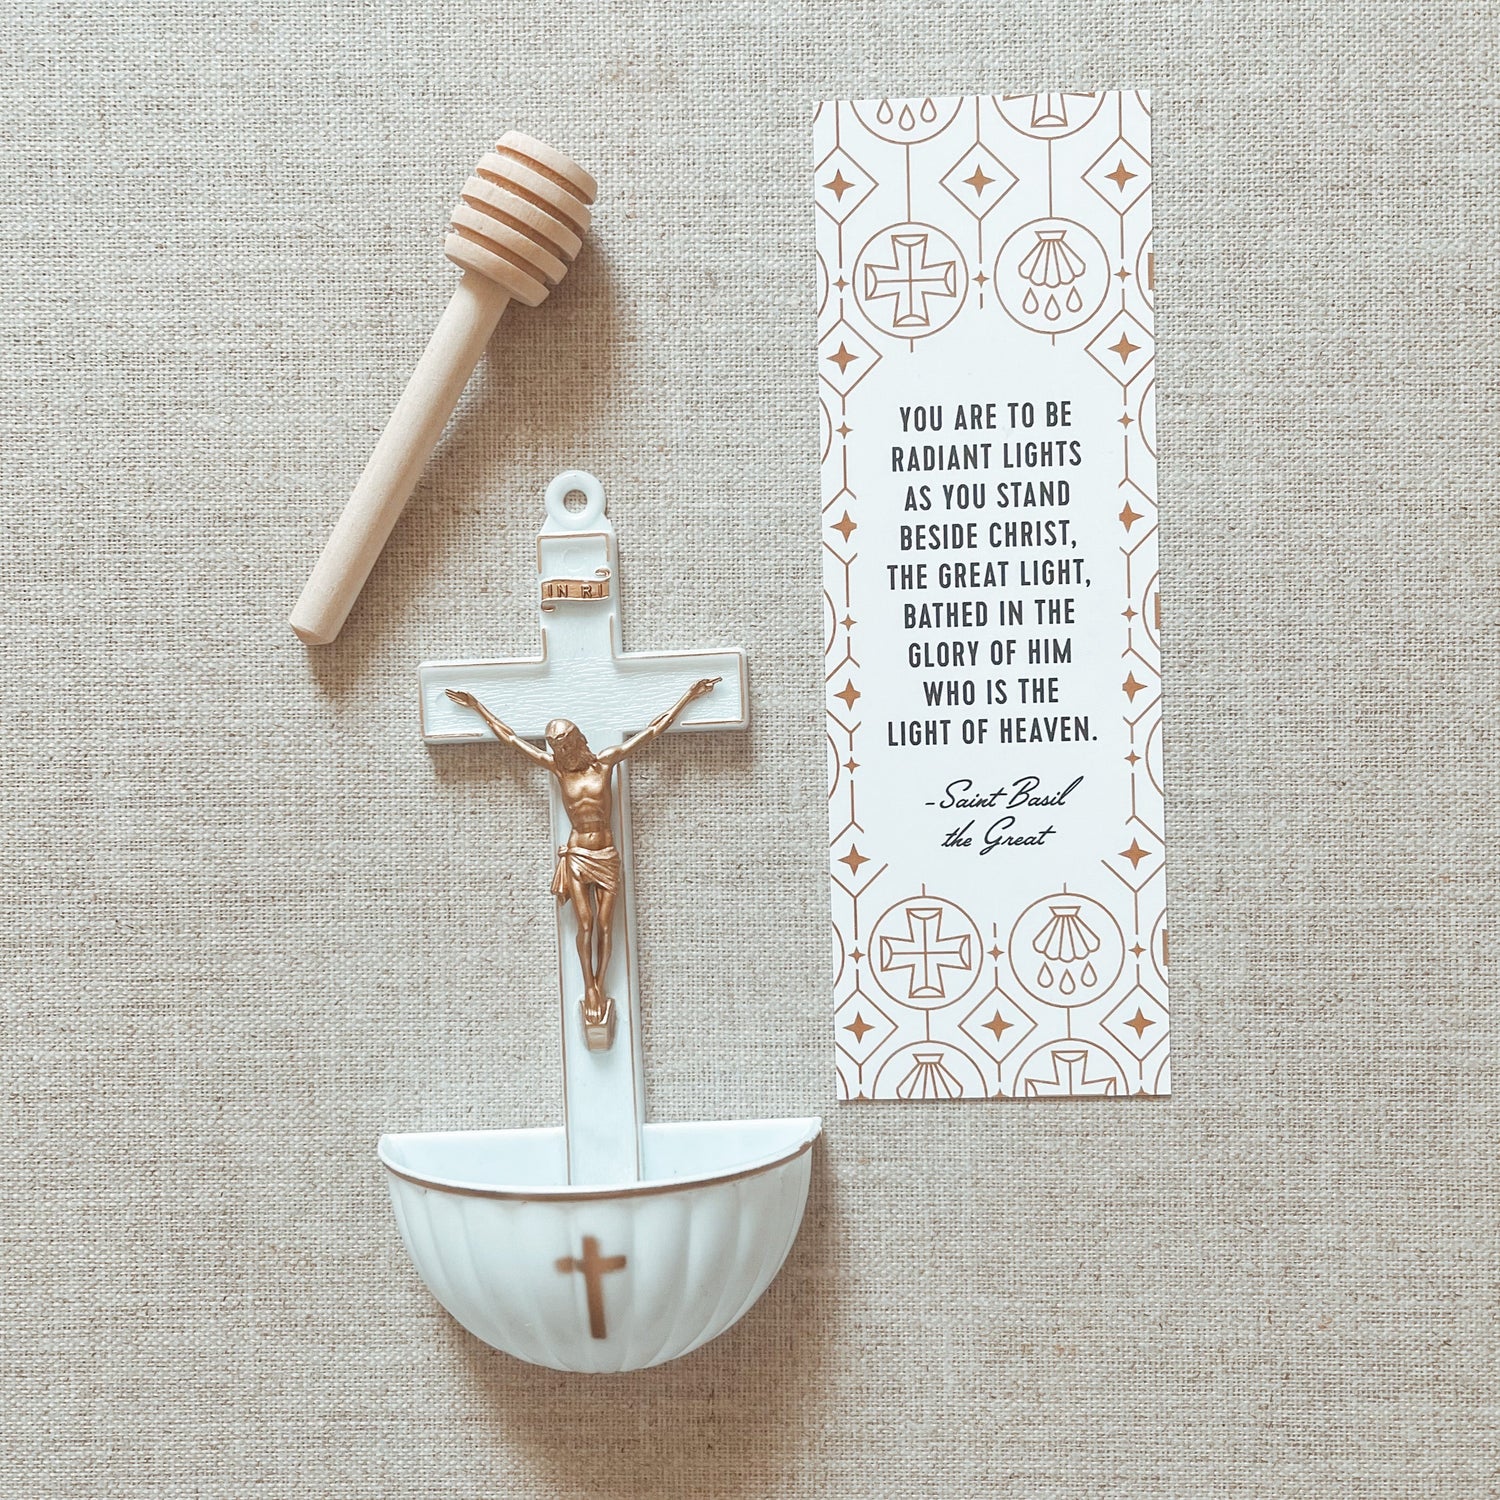 Holy Water Font and Aspergillum with Baptismal Promises Renewal Card